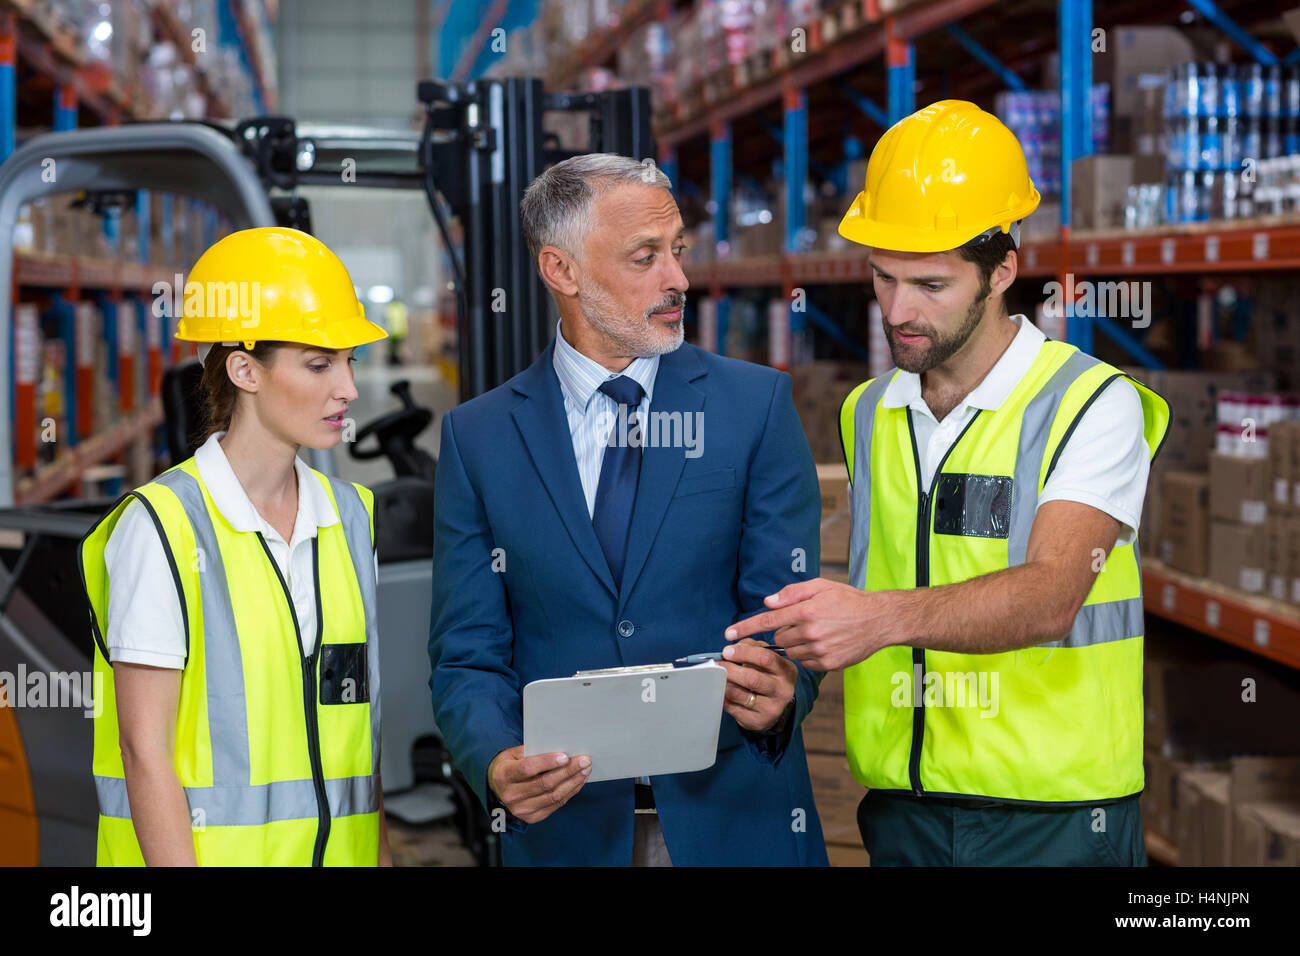 Warehouse manager and co-workers discussing over clipboard Stock Photo